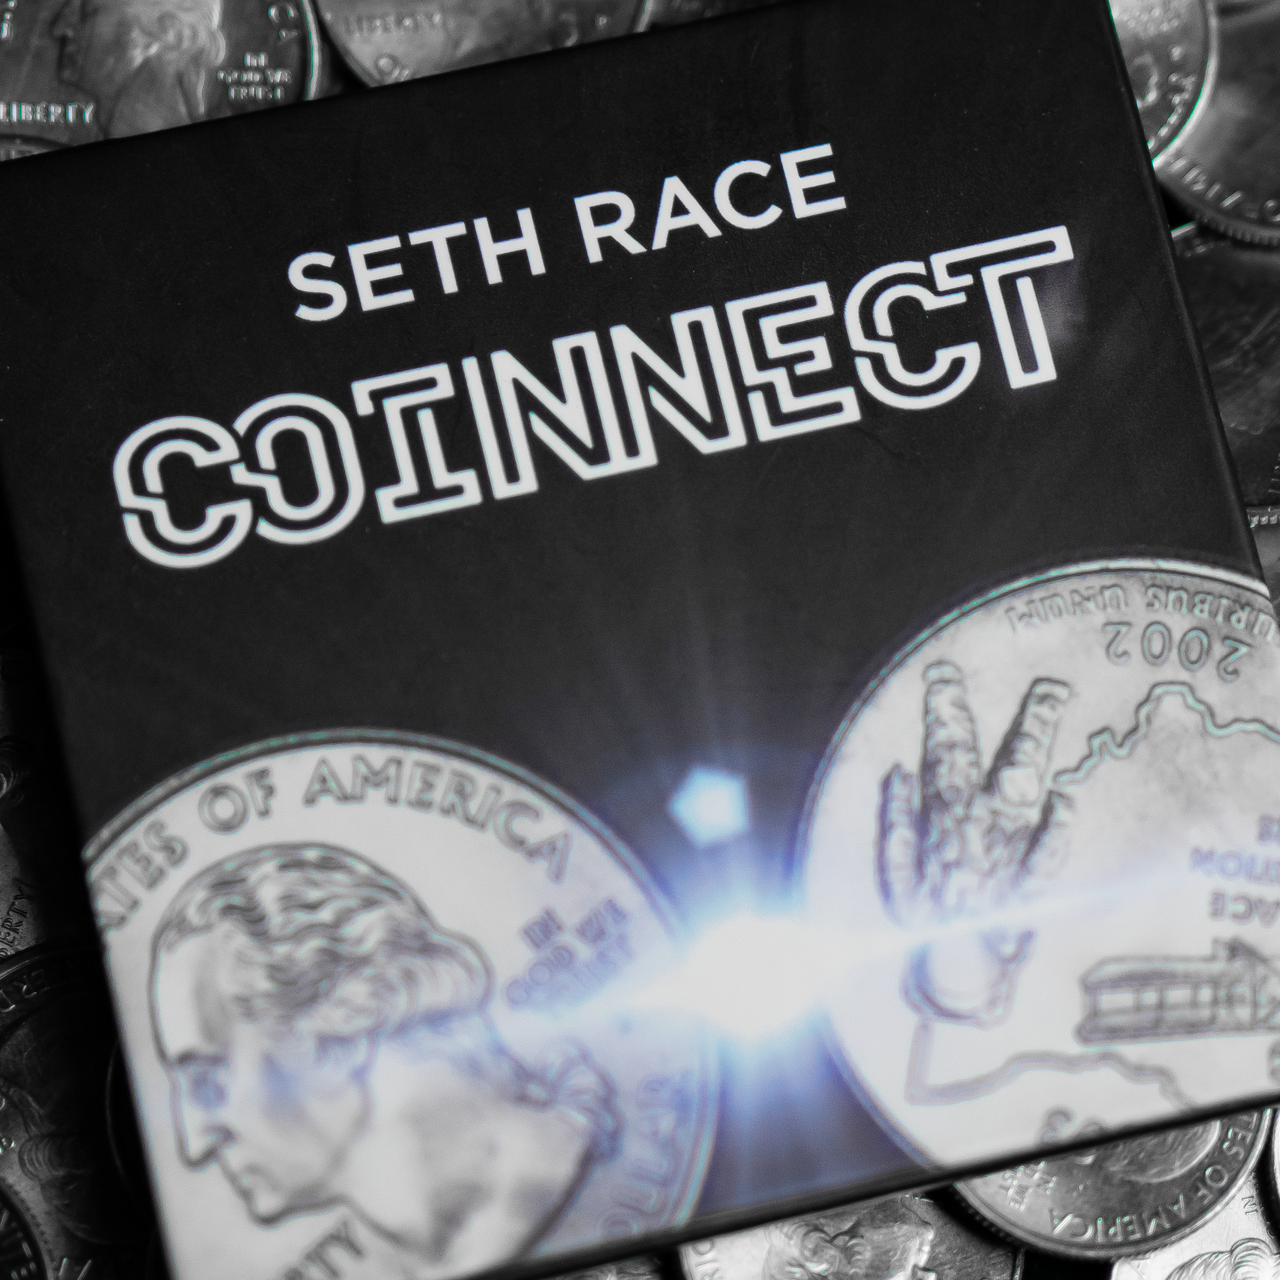 Coinnect by Seth Race (Mp4 Video Download)